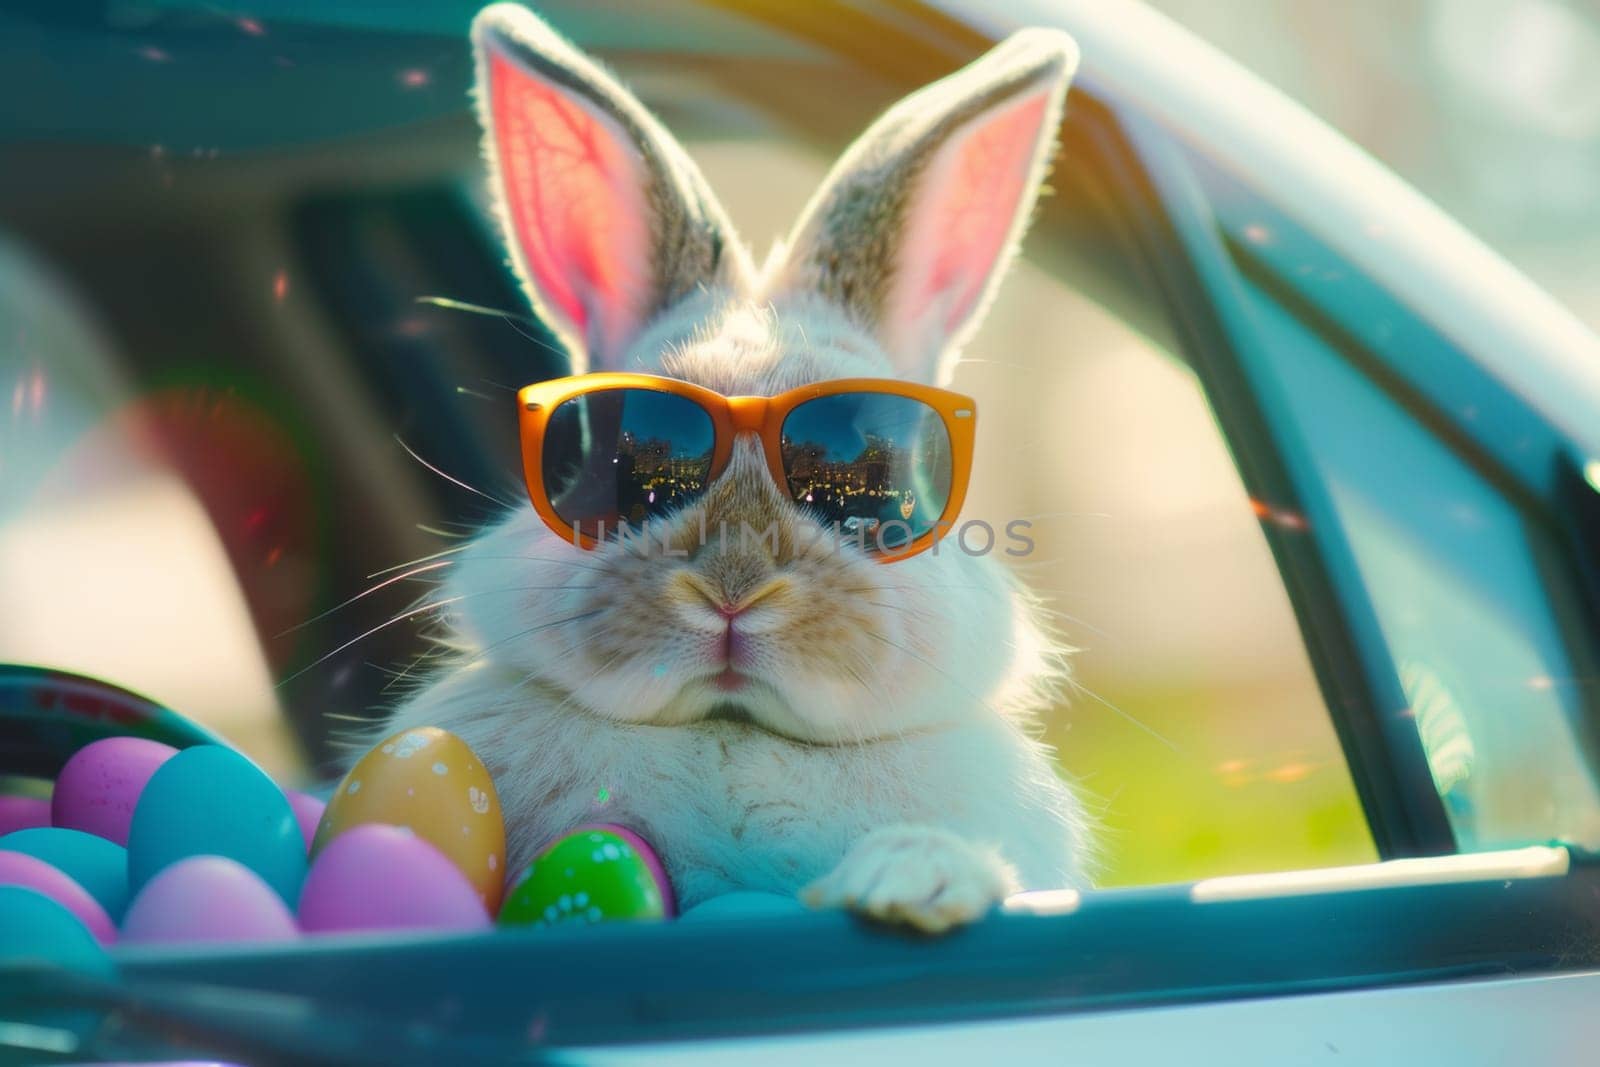 A rabbit wearing sunglasses and holding a basket of Easter eggs. The rabbit is sitting in a car